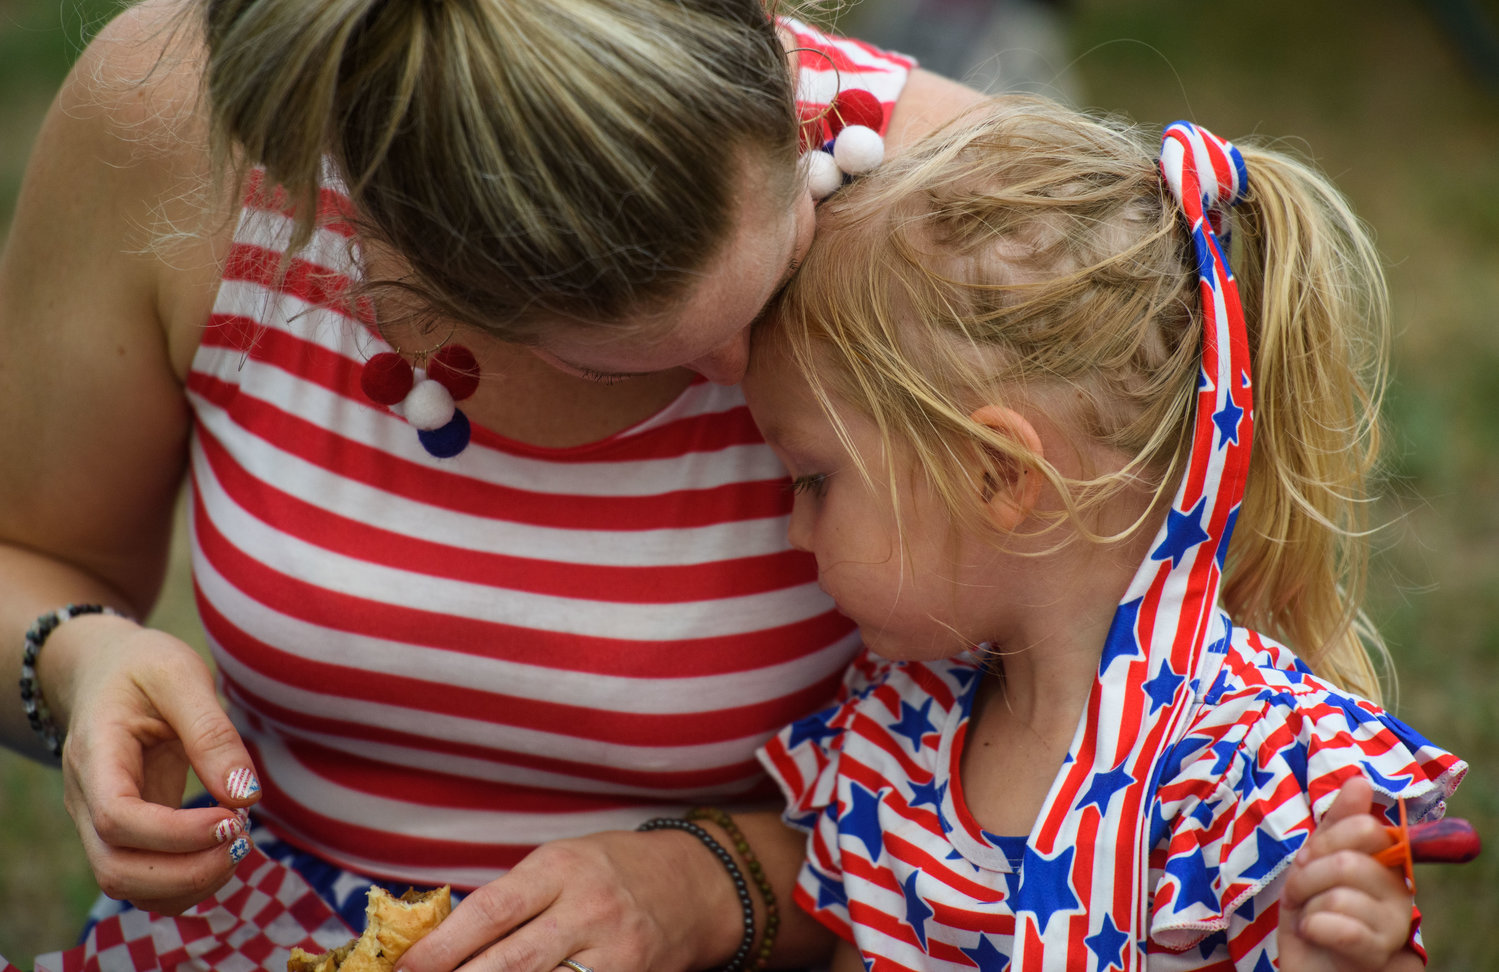 A mother and daughter share a snuggle during the Independence Day celebration at Festival Park on Monday.